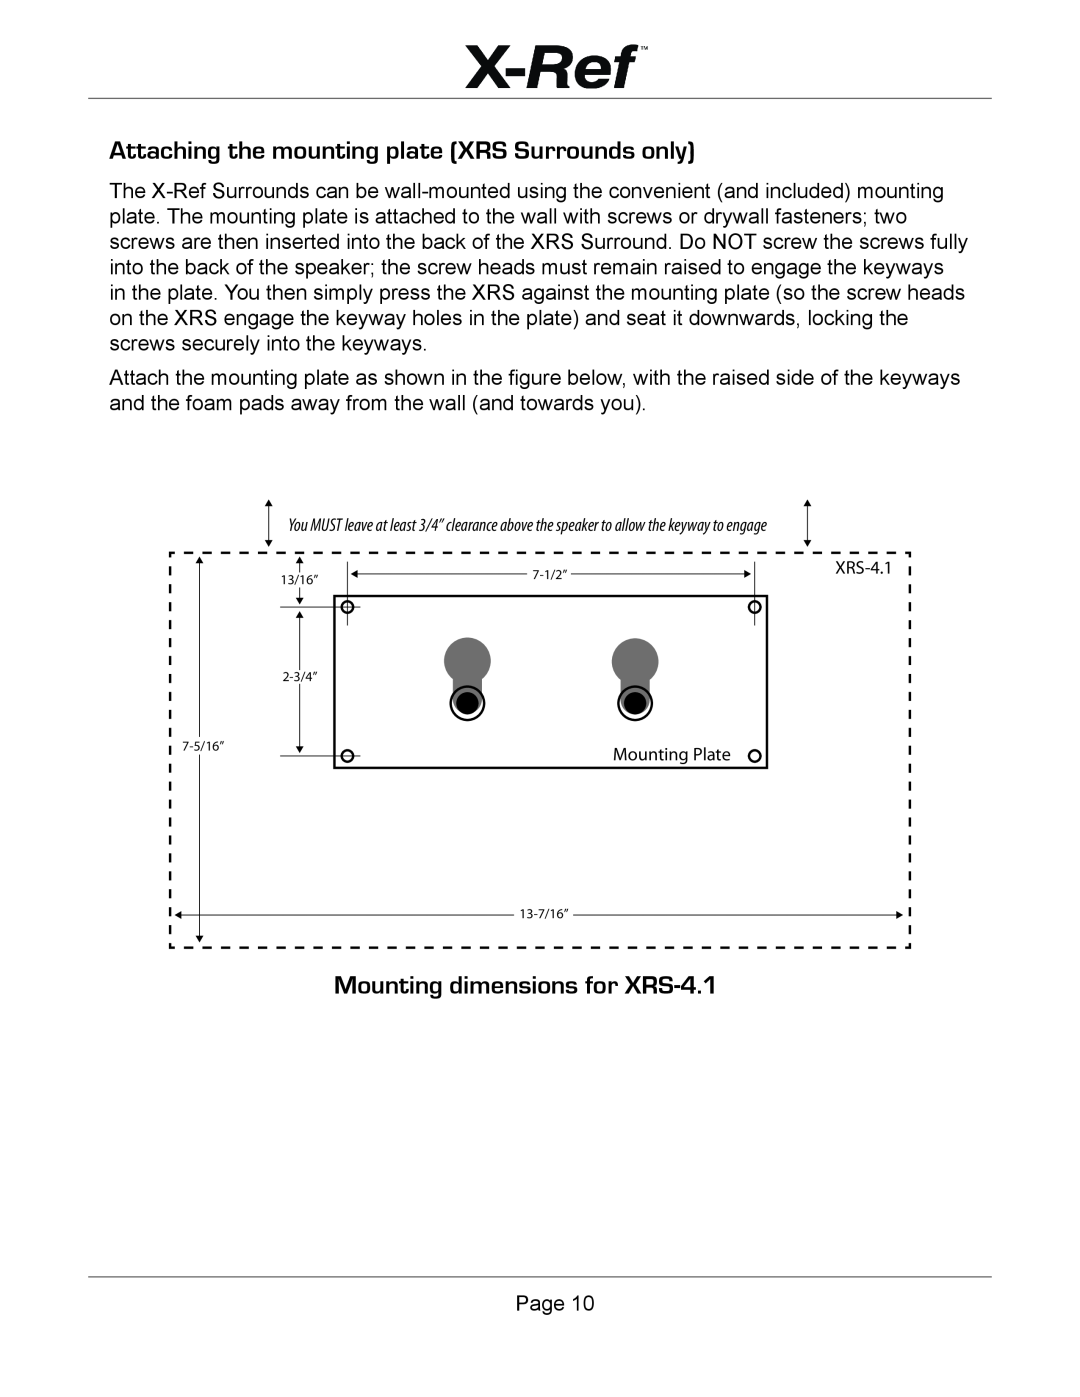 Emotiva X-Ref user manual Attaching the mounting plate XRS Surrounds only, Mounting dimensions for XRS-4.1 